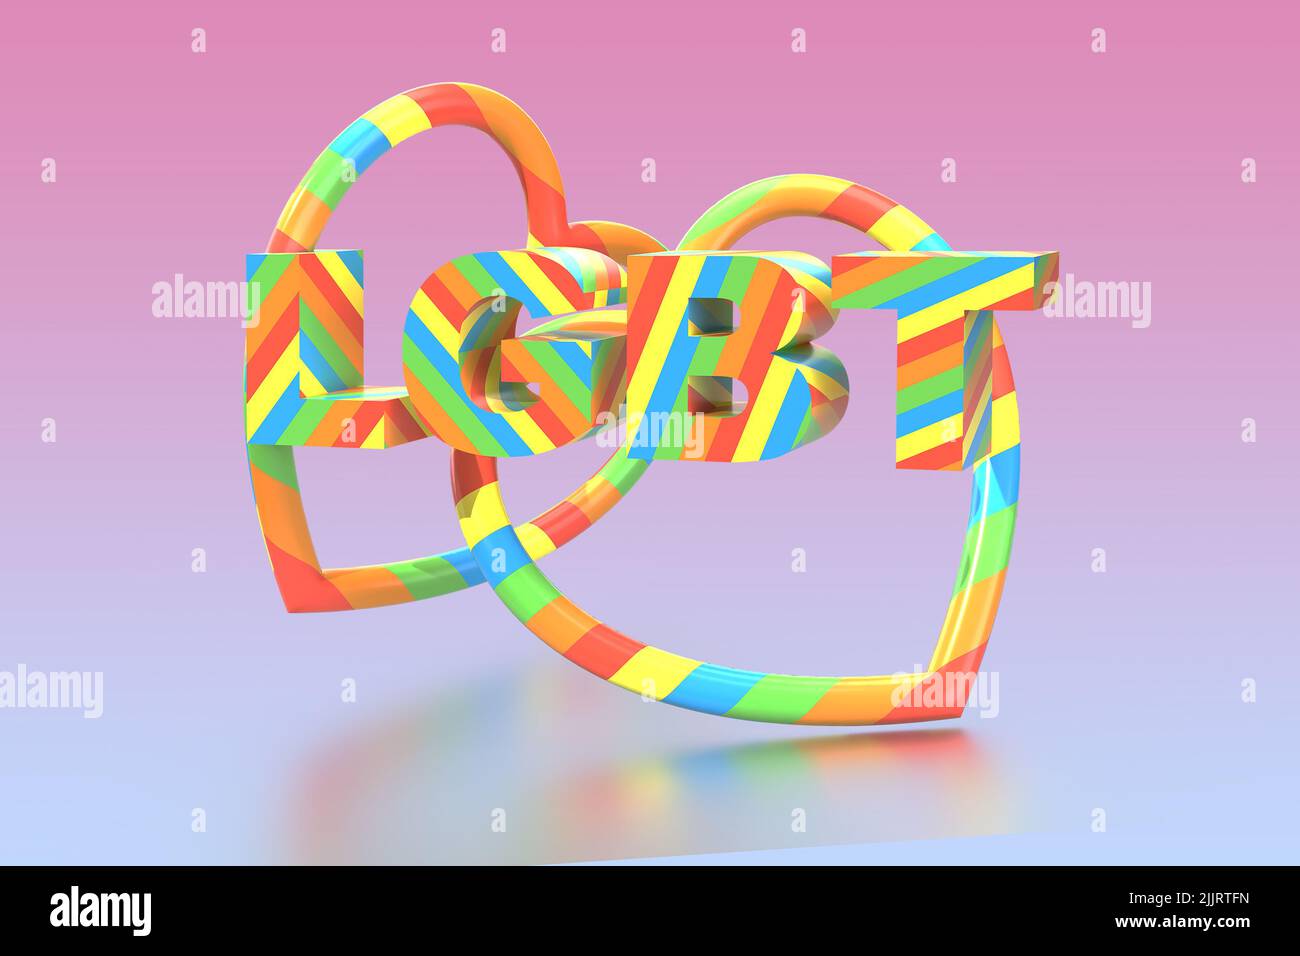 LGBT 3D Render in Rainbow Colours on an Iridescent Background. Stock Photo